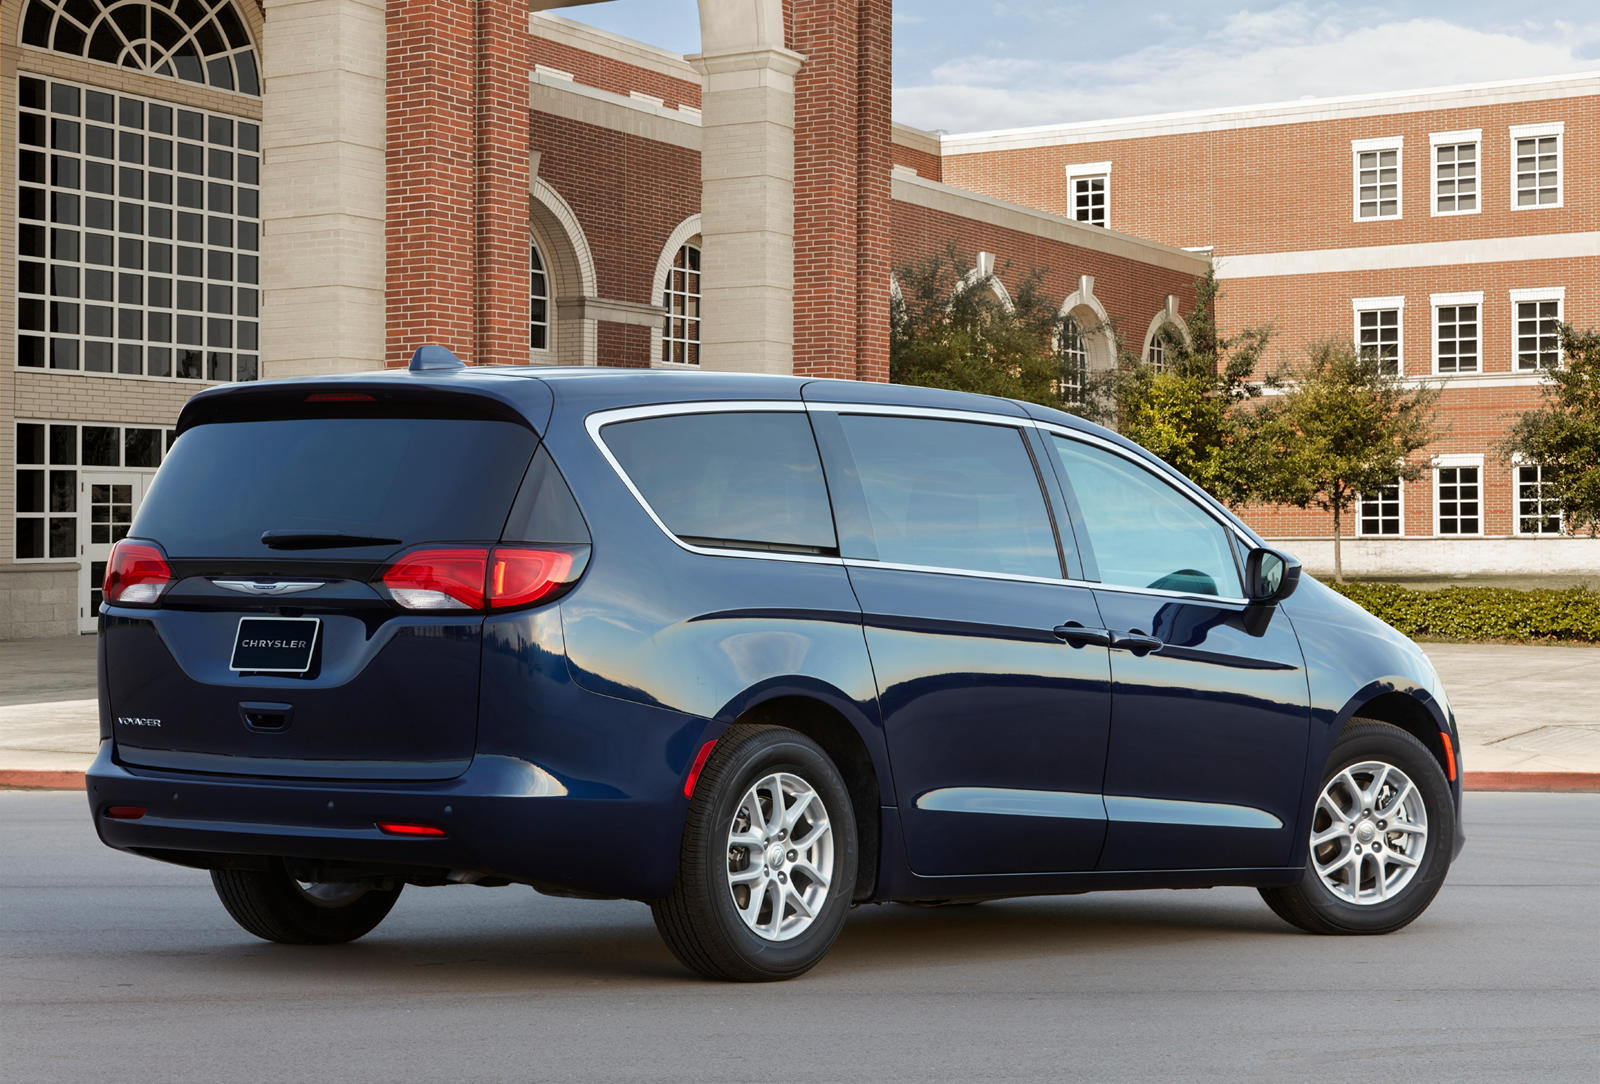 2023 Chrysler Voyager Review, Trims, Specs, Price, New Interior